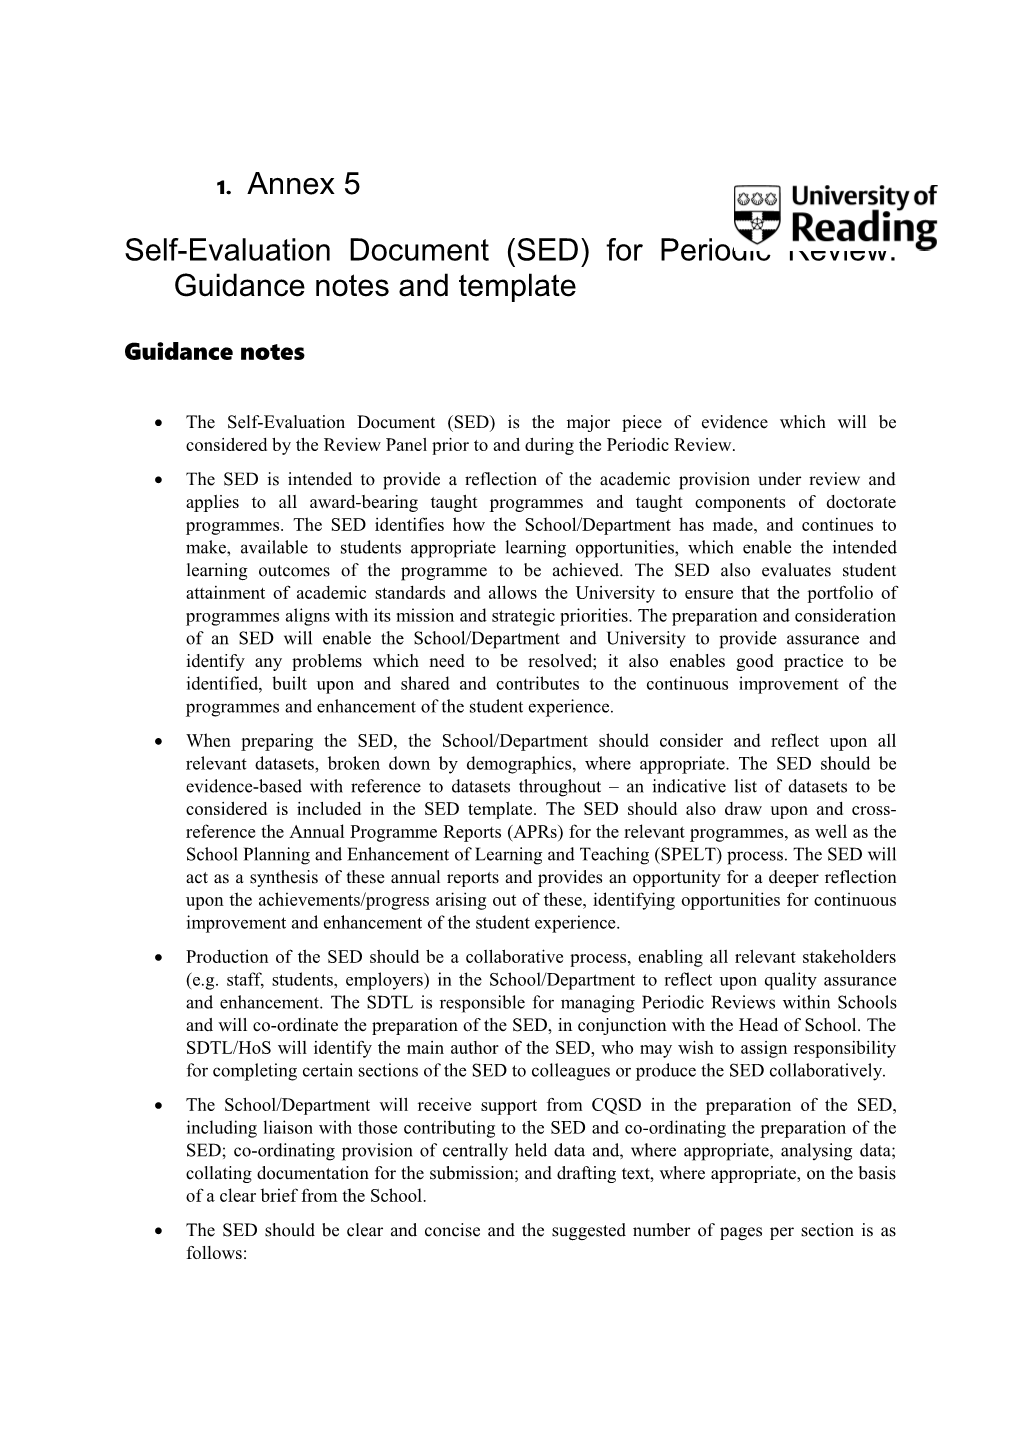 Self-Evaluation Document (SED) for Periodic Review: Guidance Notes and Template